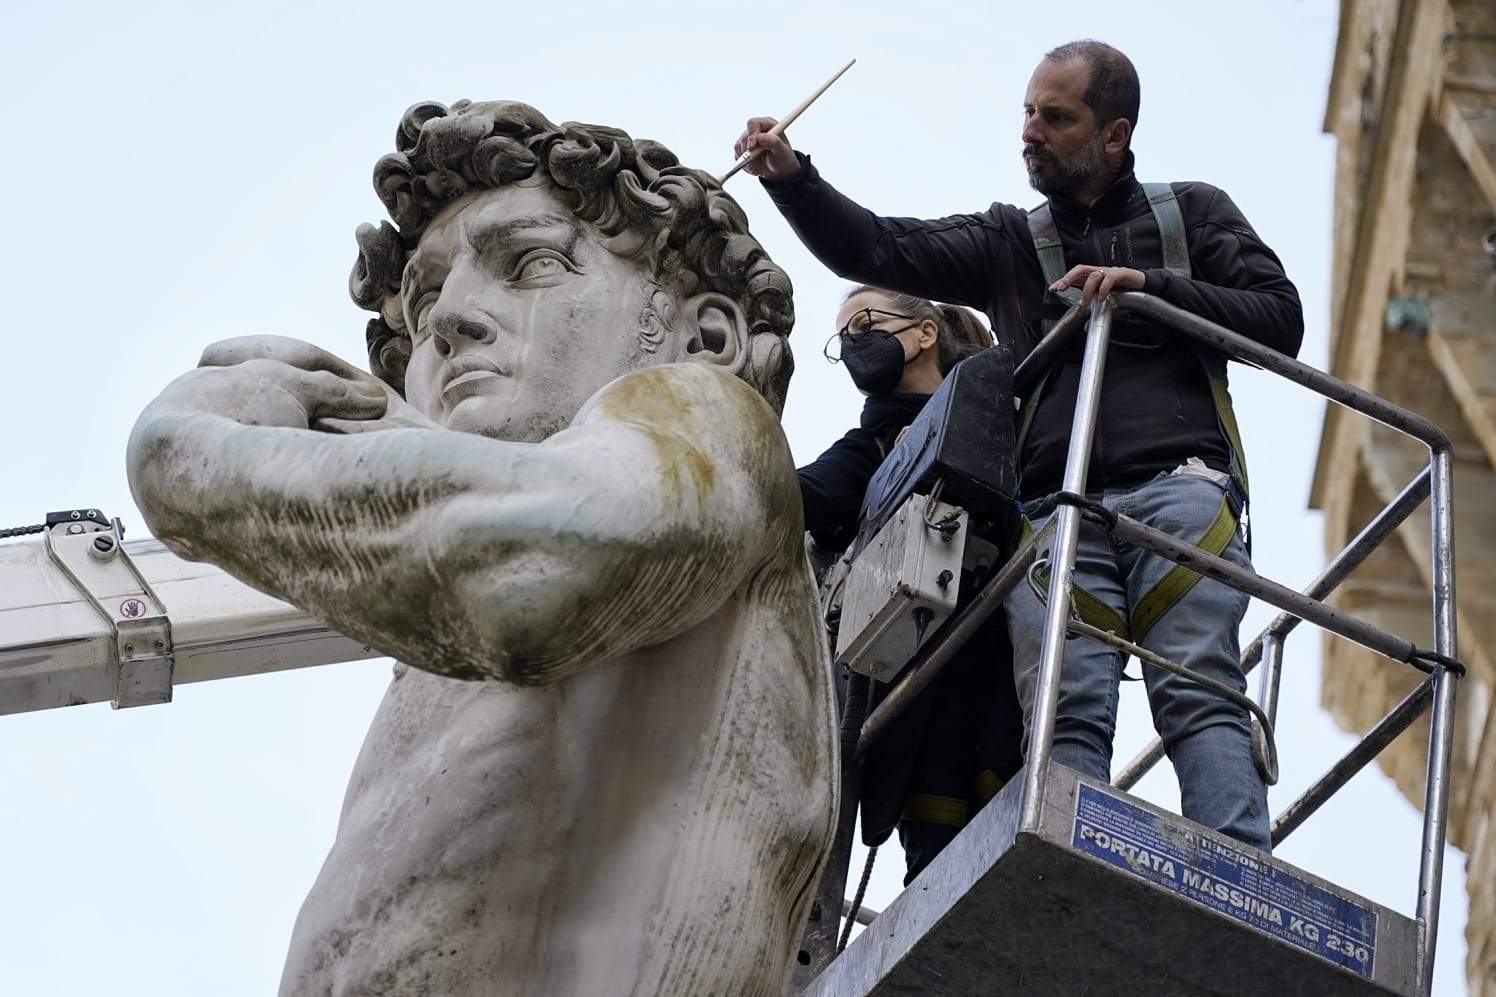 Damage of 15,000 euros to the David in Piazza della Signoria after yesterday's action 